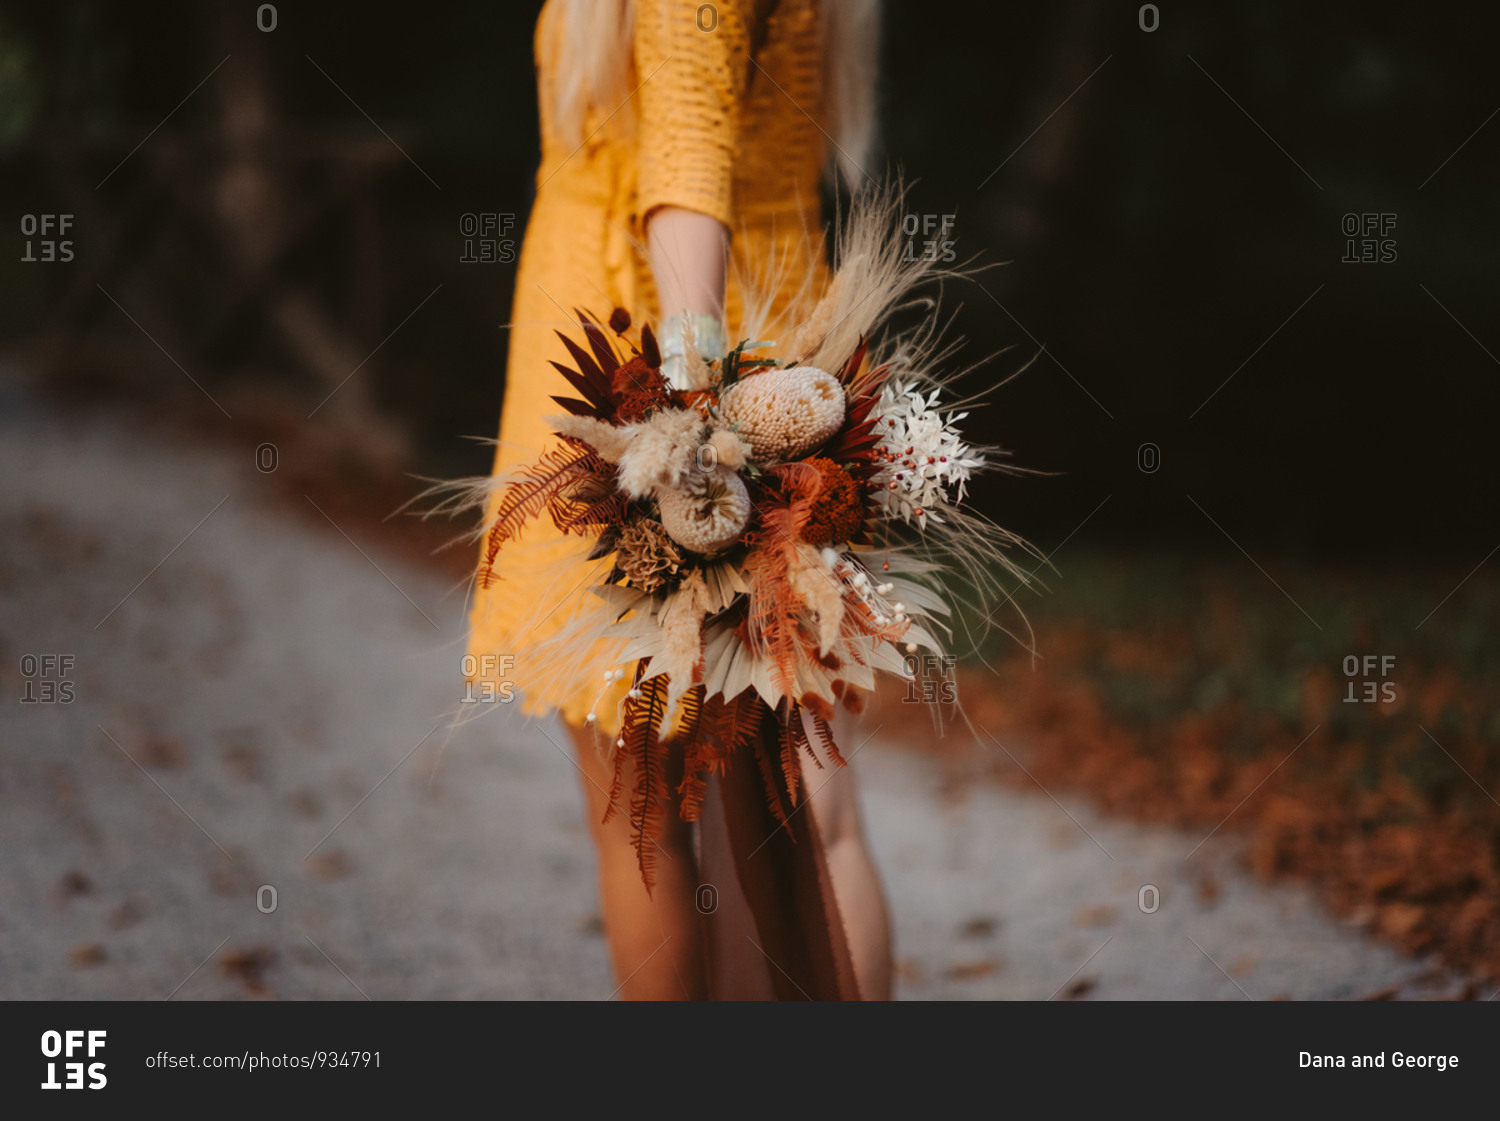 Bride wearing a yellow dress and holding fall wedding bouquet